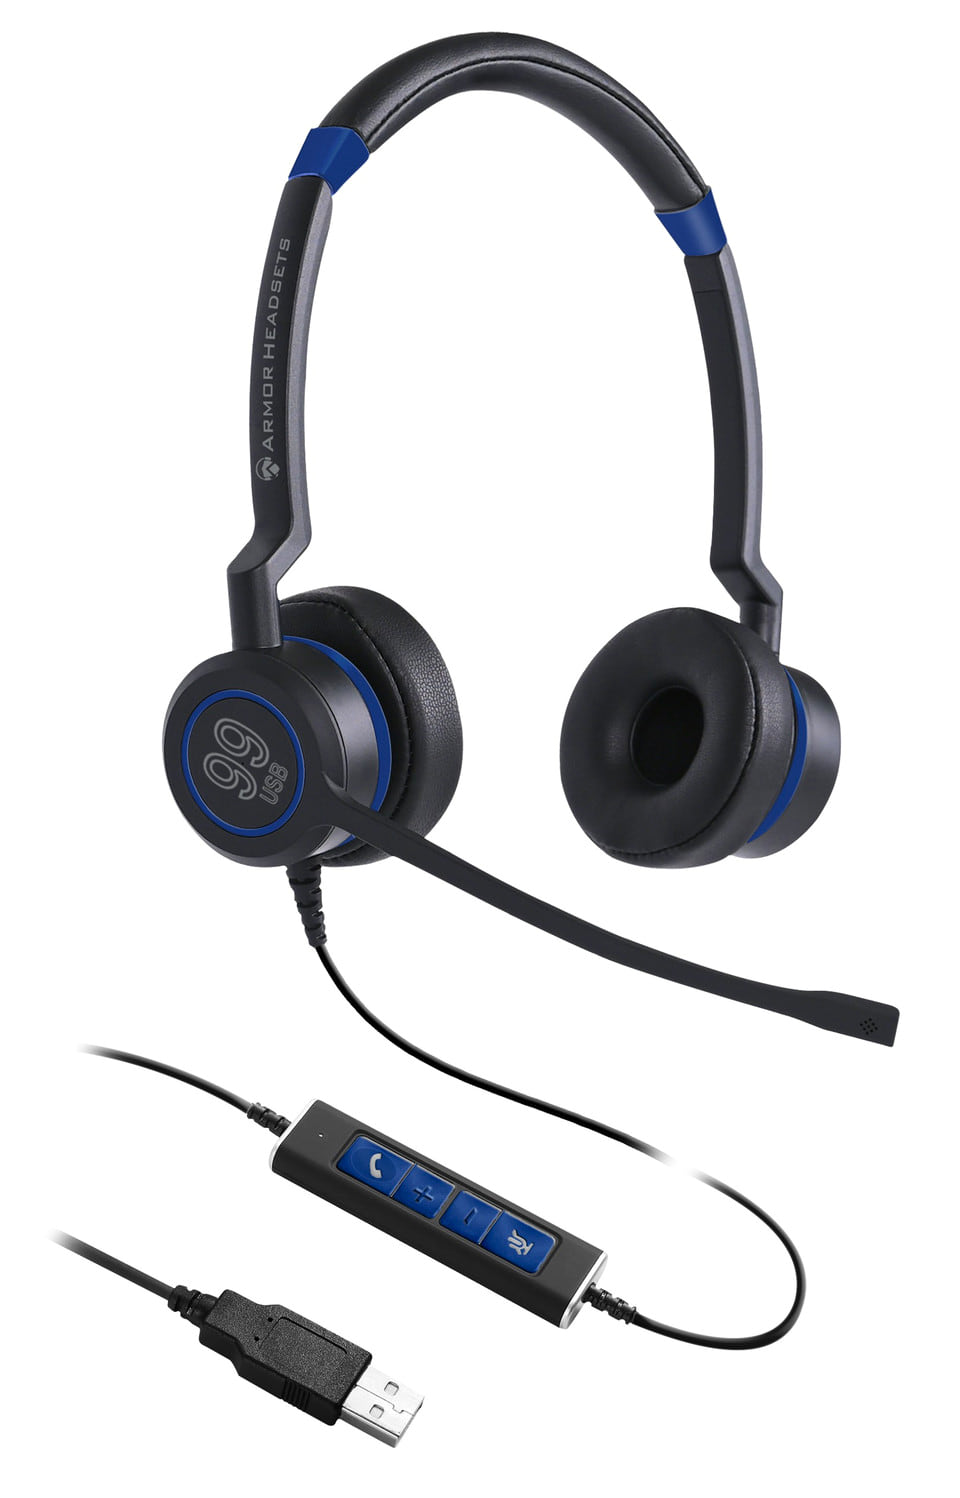 Headset Buddy Review